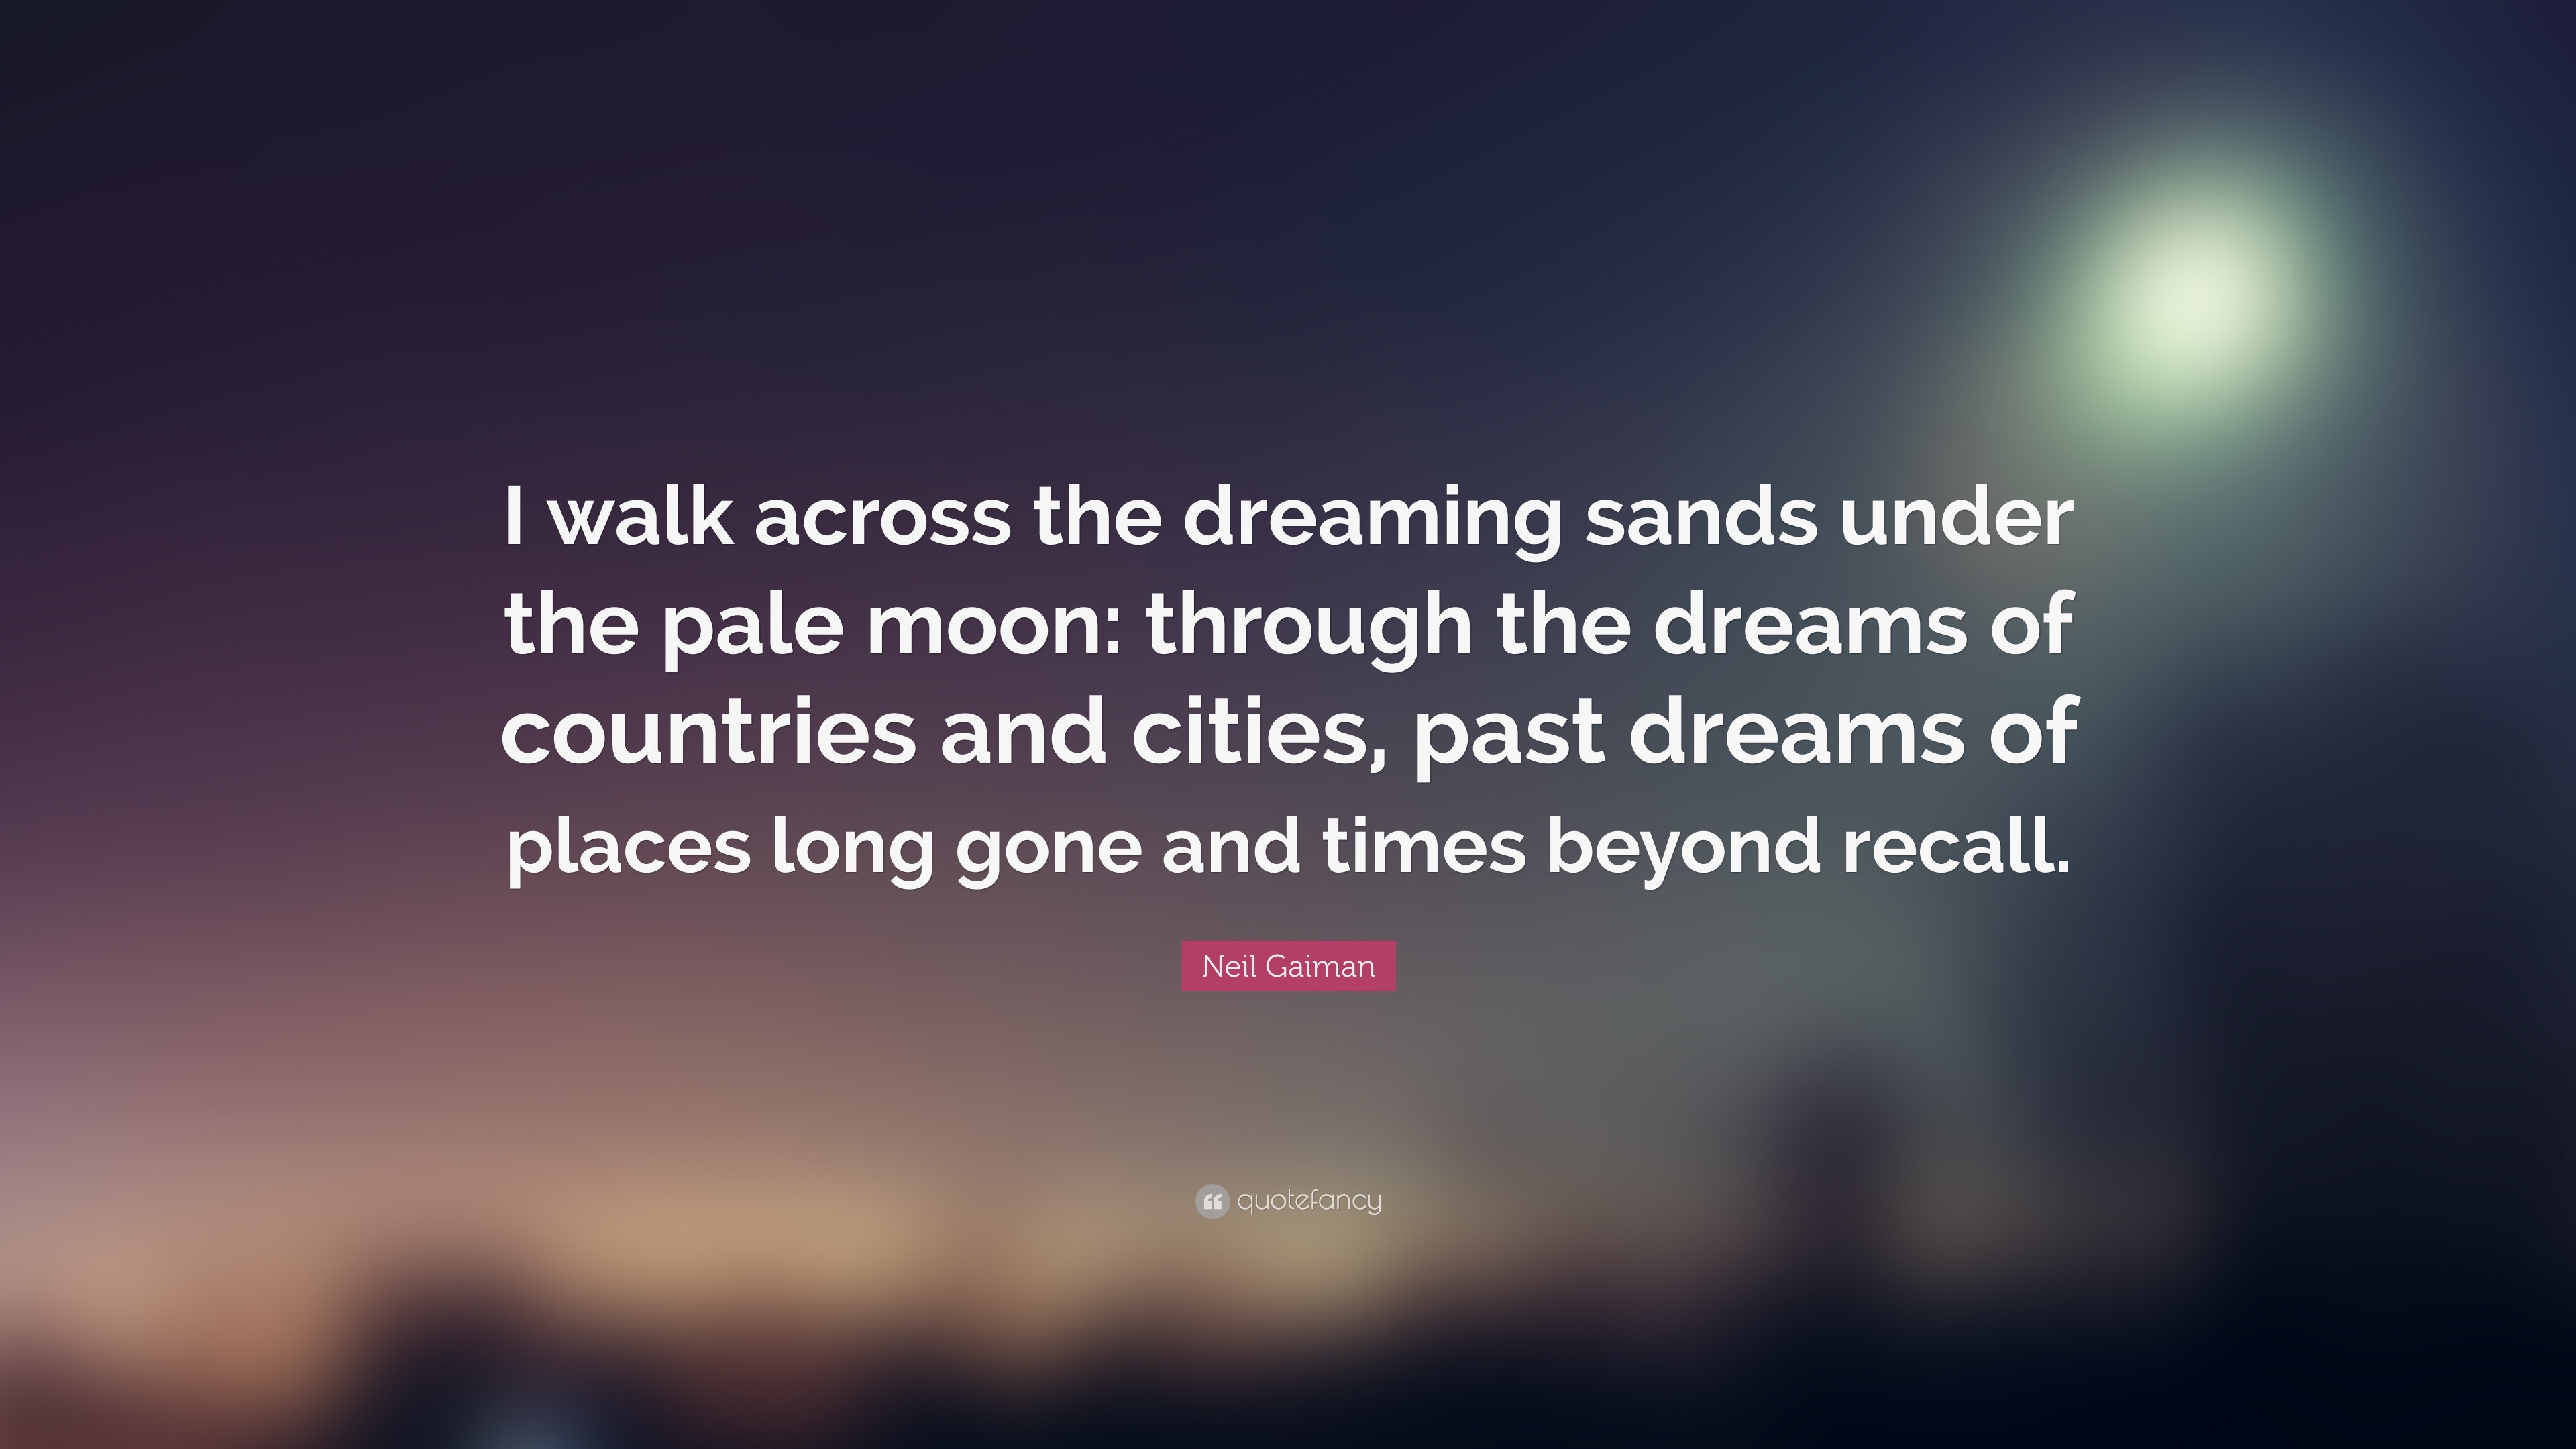 Neil Gaiman Quote I Walk Across The Dreaming Sands Under The Pale Moon Through The Dreams Of Countries And Cities Past Dreams Of Places